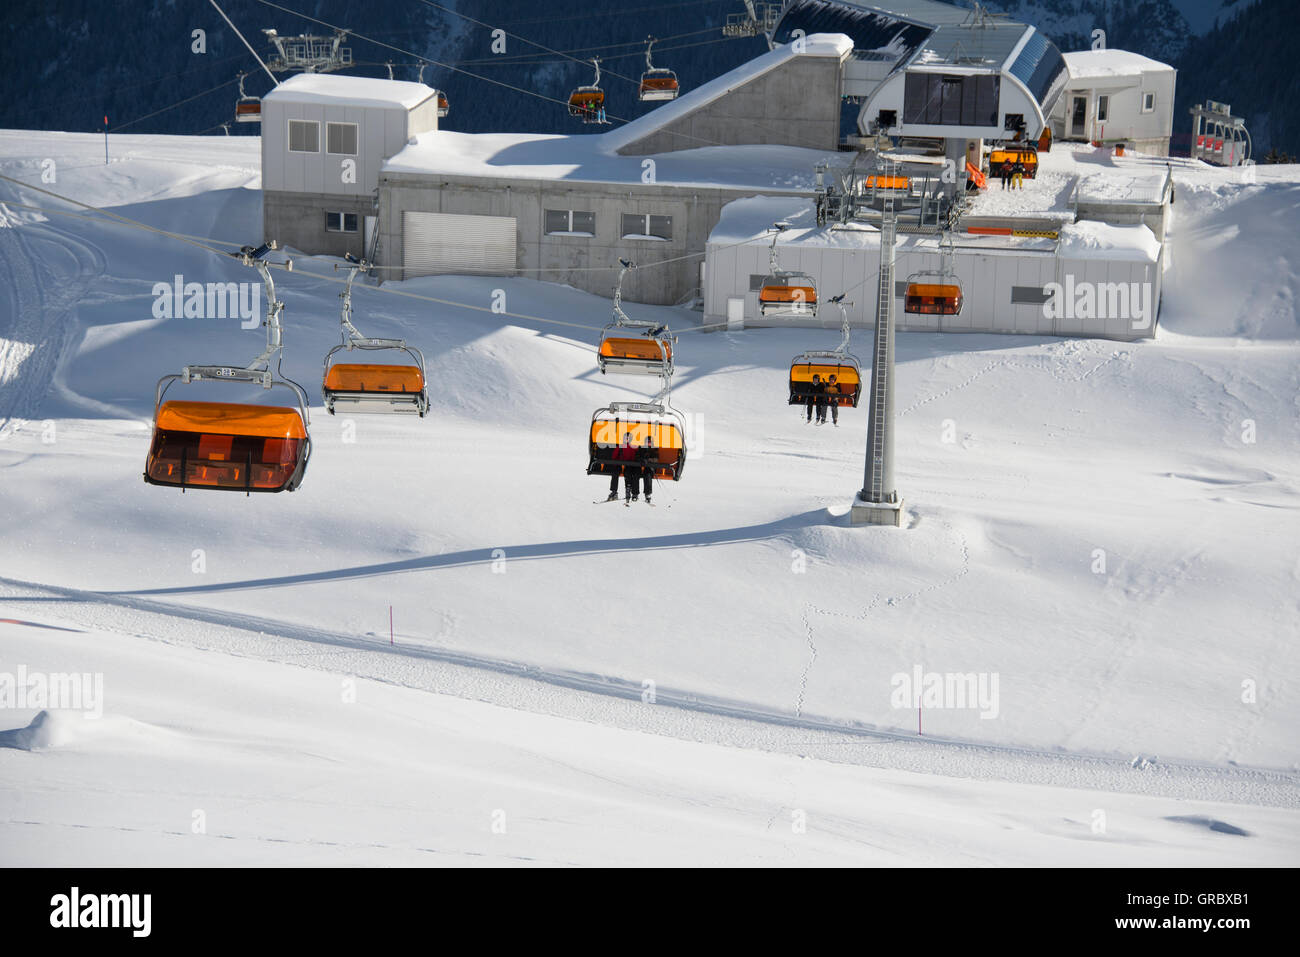 Chair Lift With Orange Weather Protectors On A Sunny Winterday, Midwaystation Stock Photo